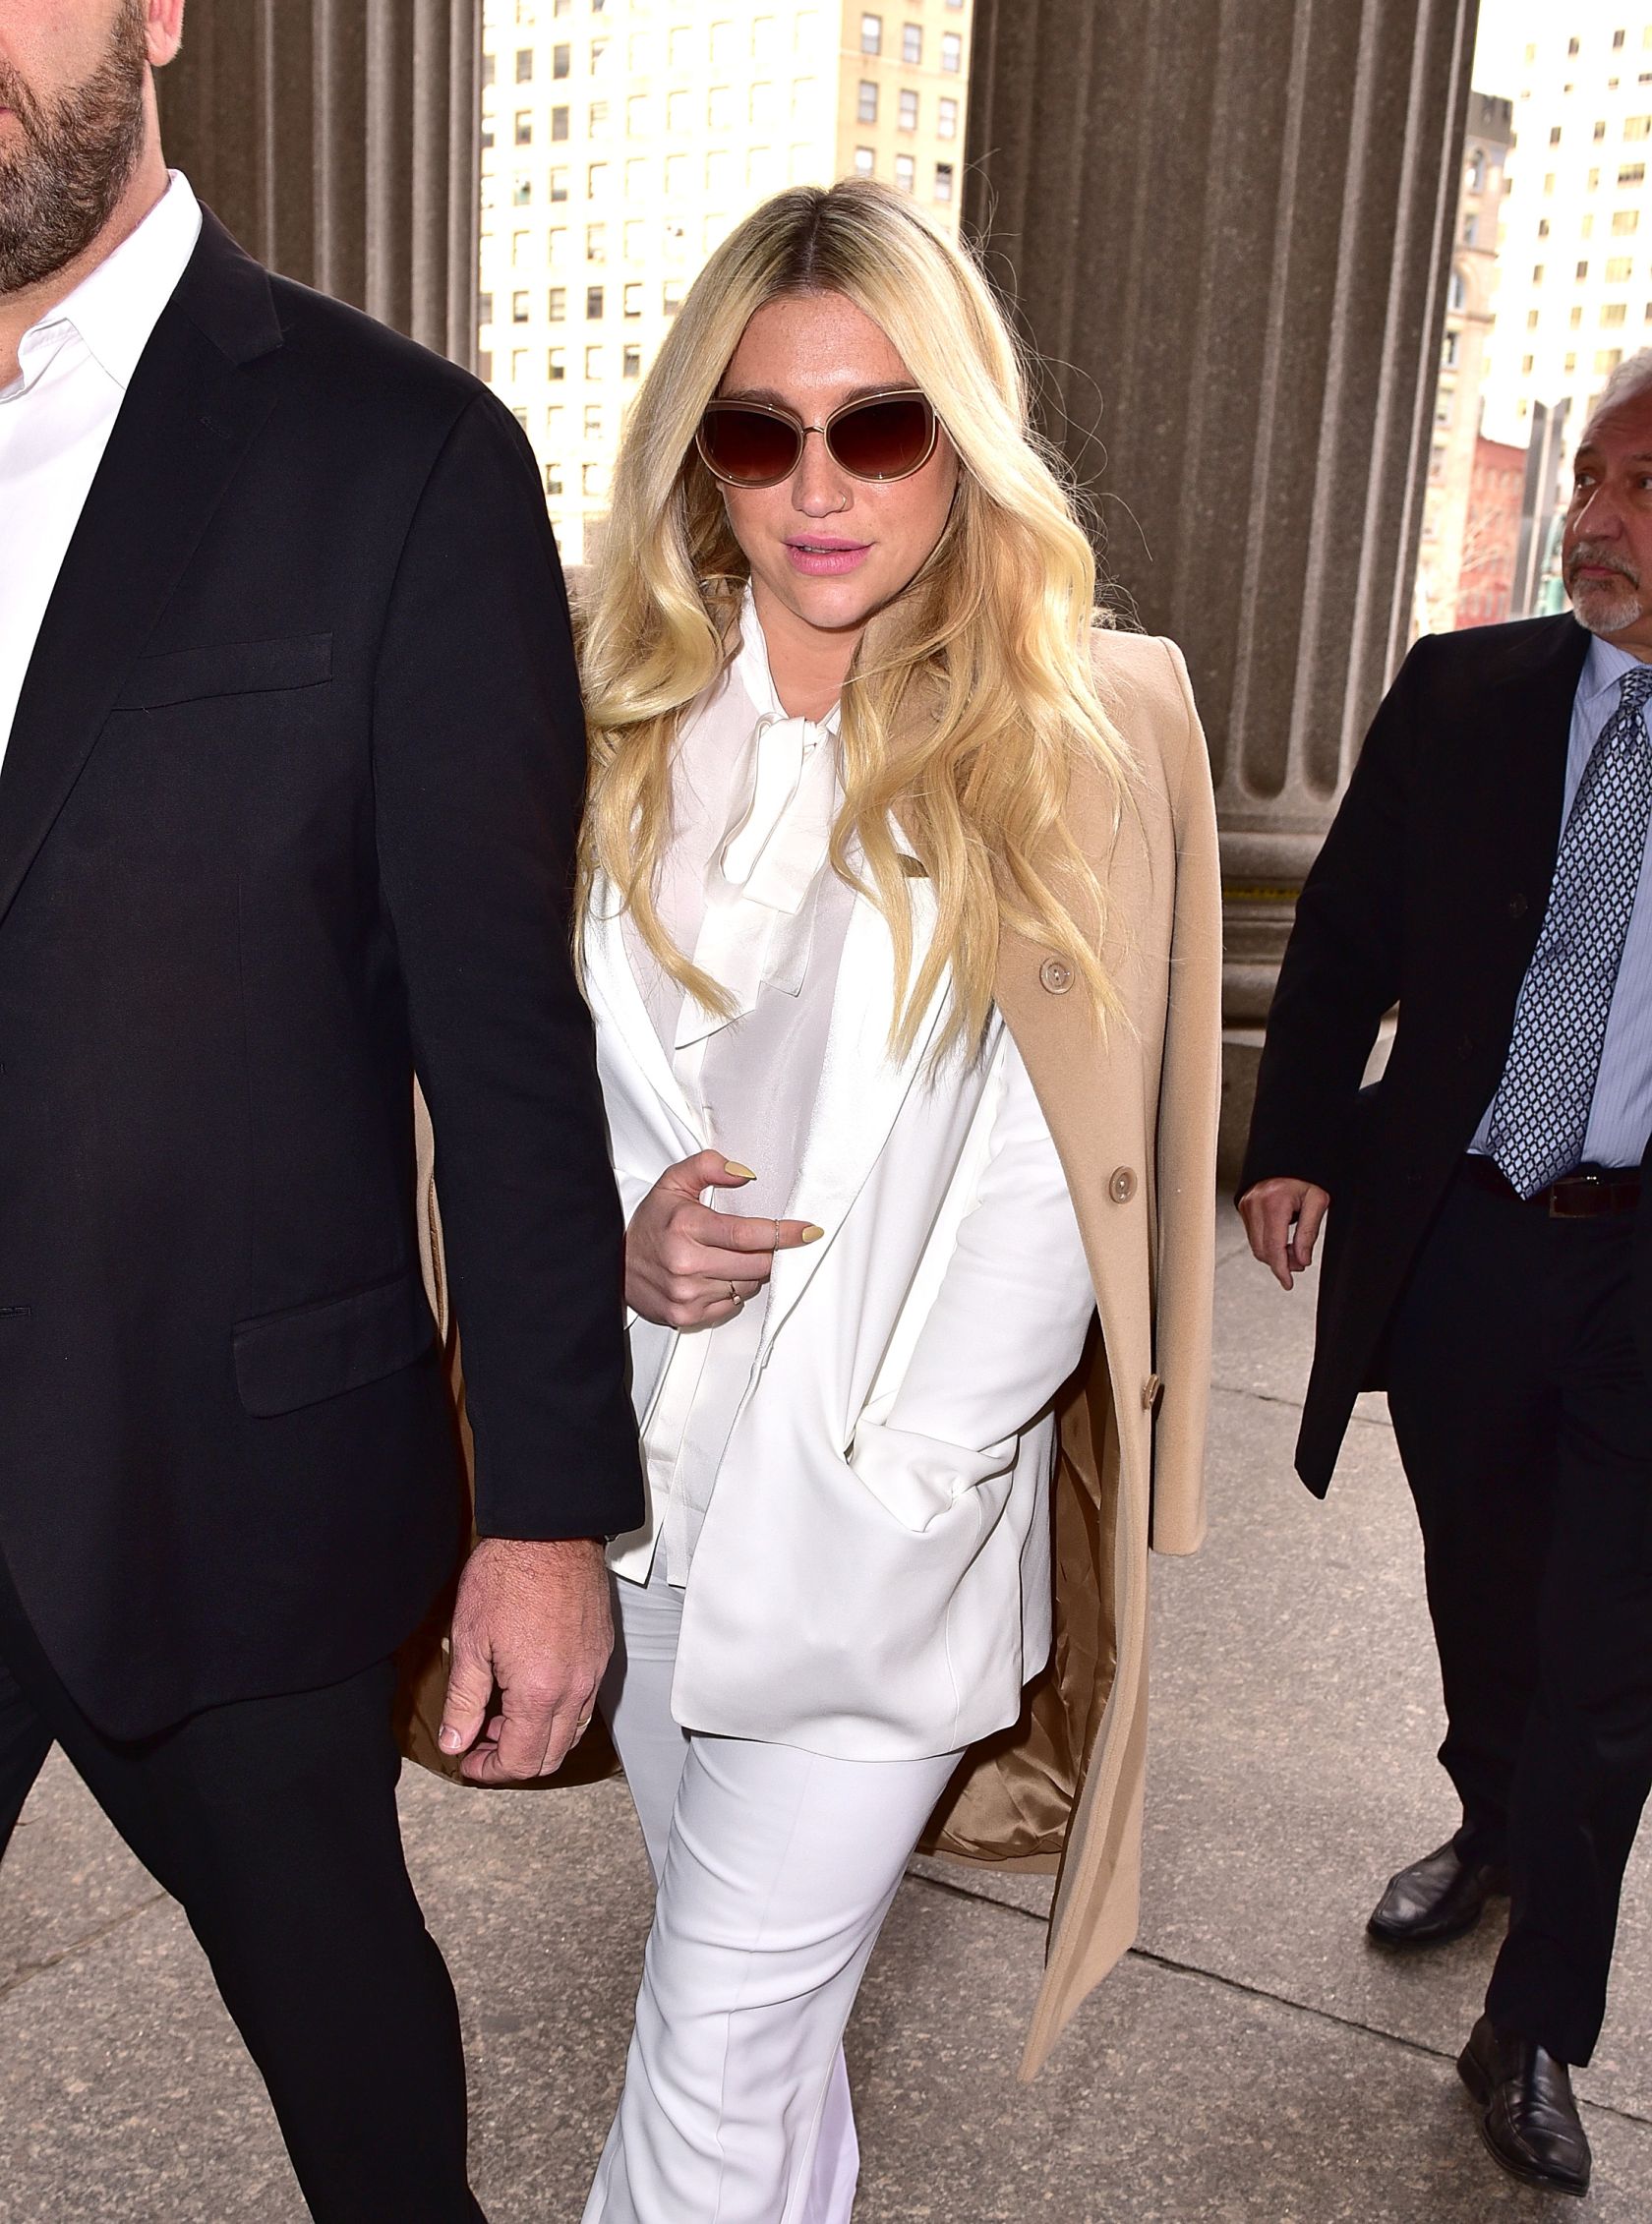 Singer Kesha Attends NYC Court Hearing In Lawsuit Against Producer Dr. Luke